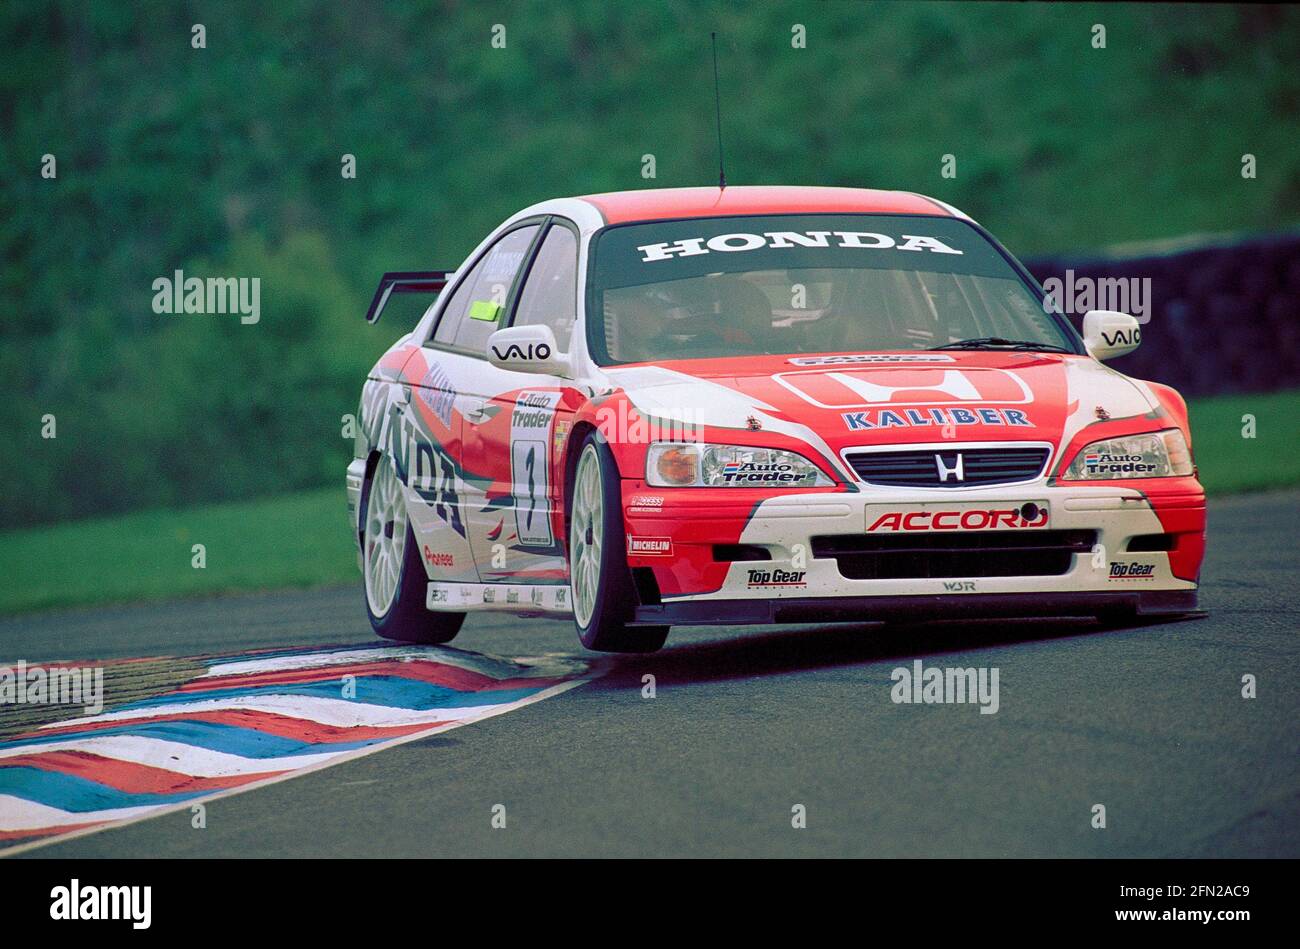 James Thompson in a  Honda Accord in rounds 5 and 6 in the BTCC championship at Thruxton Circuit in 1999 Stock Photo